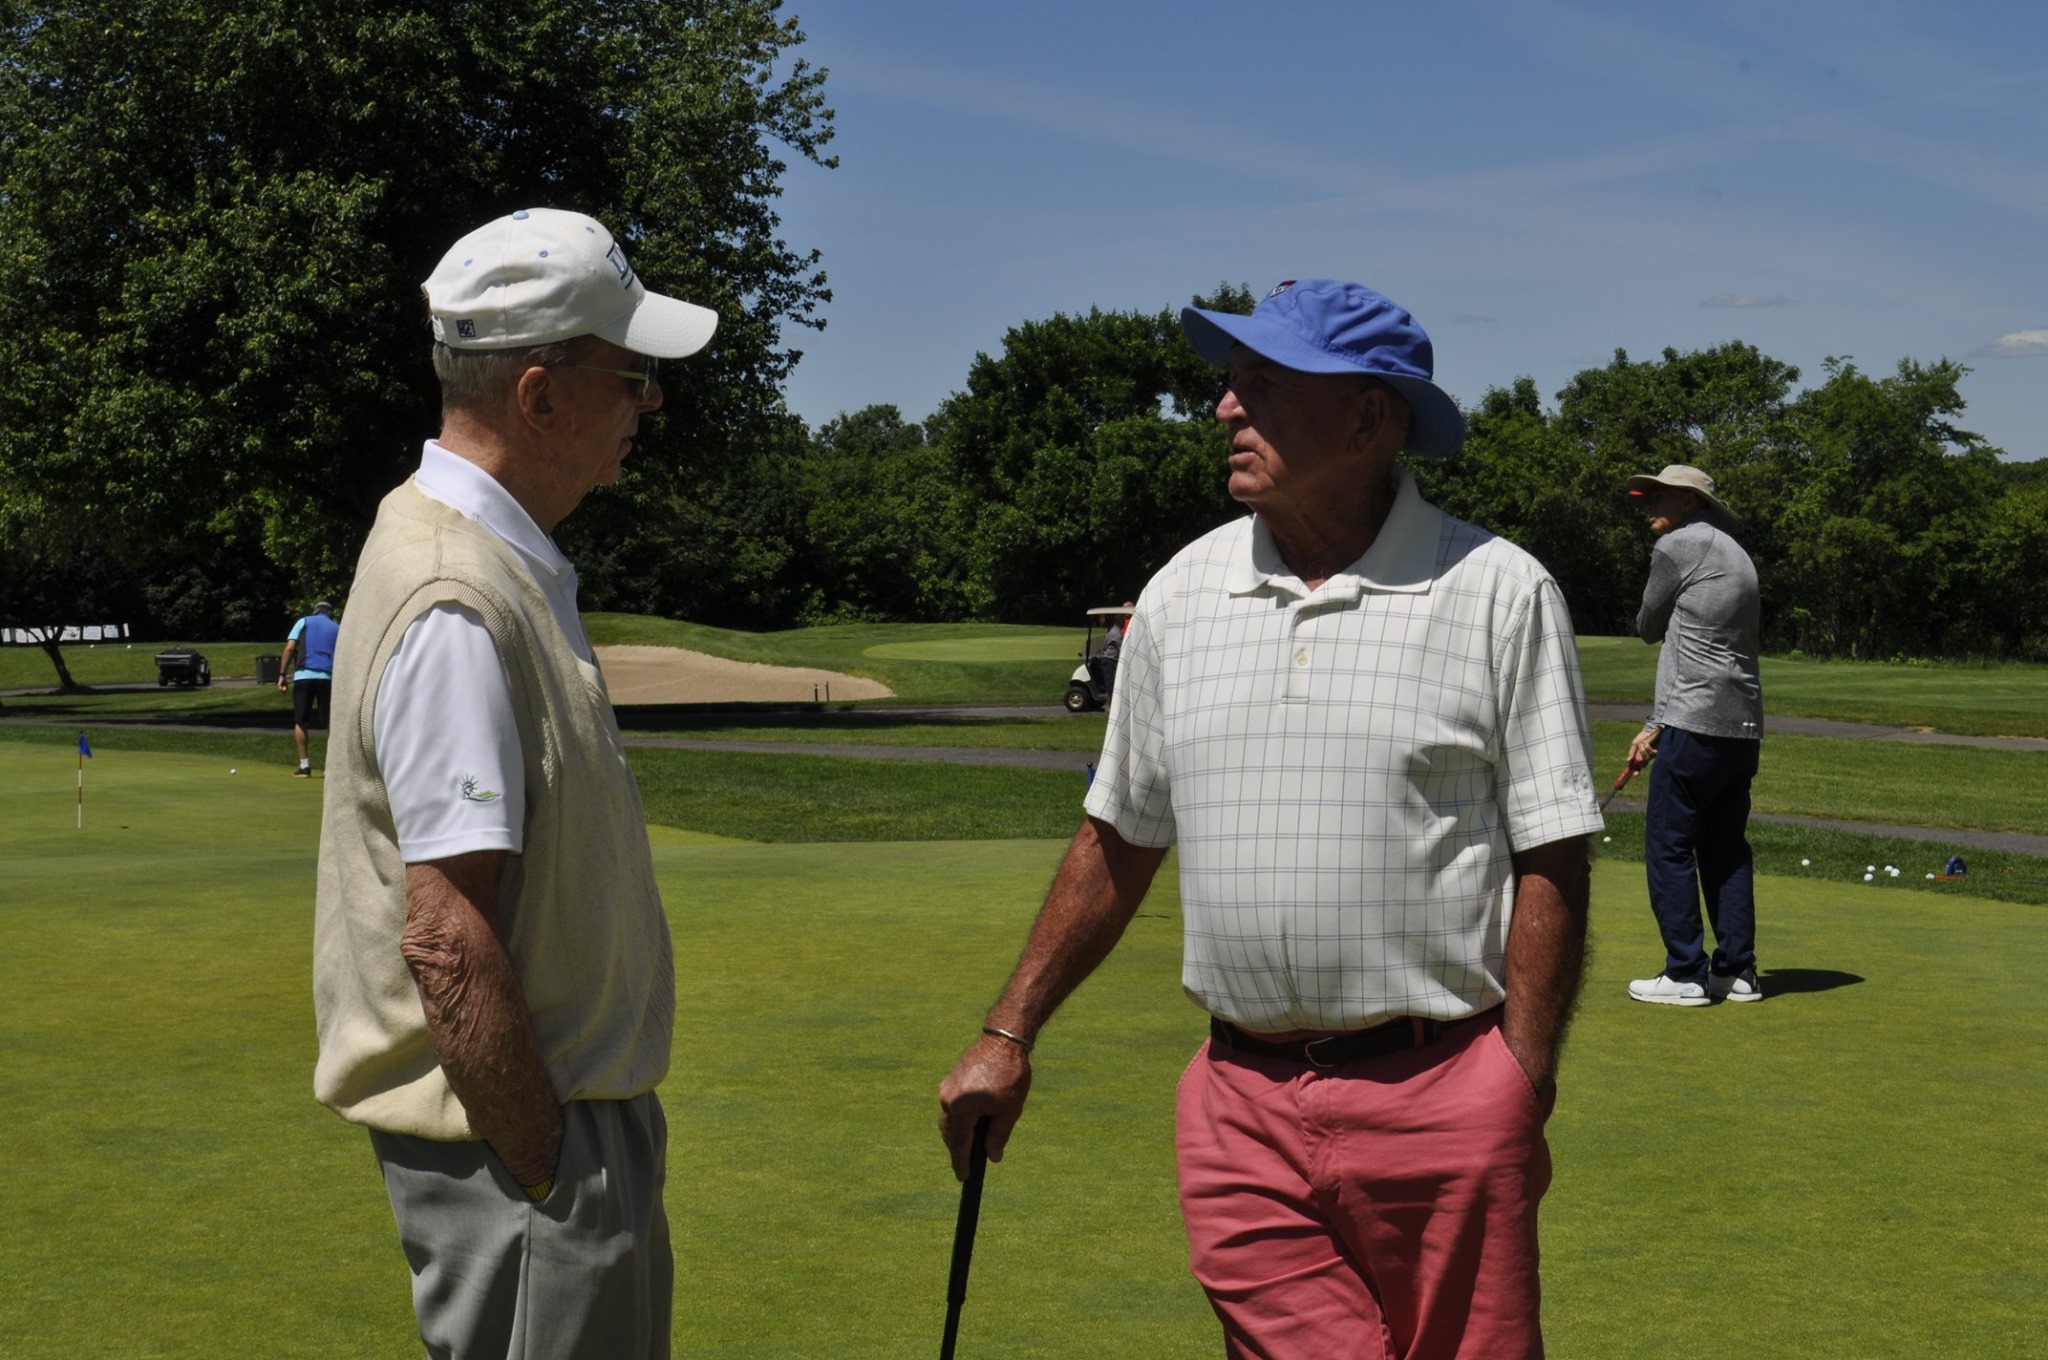 Staten Island Sports Hall of Fame Golf Outing and Reunion